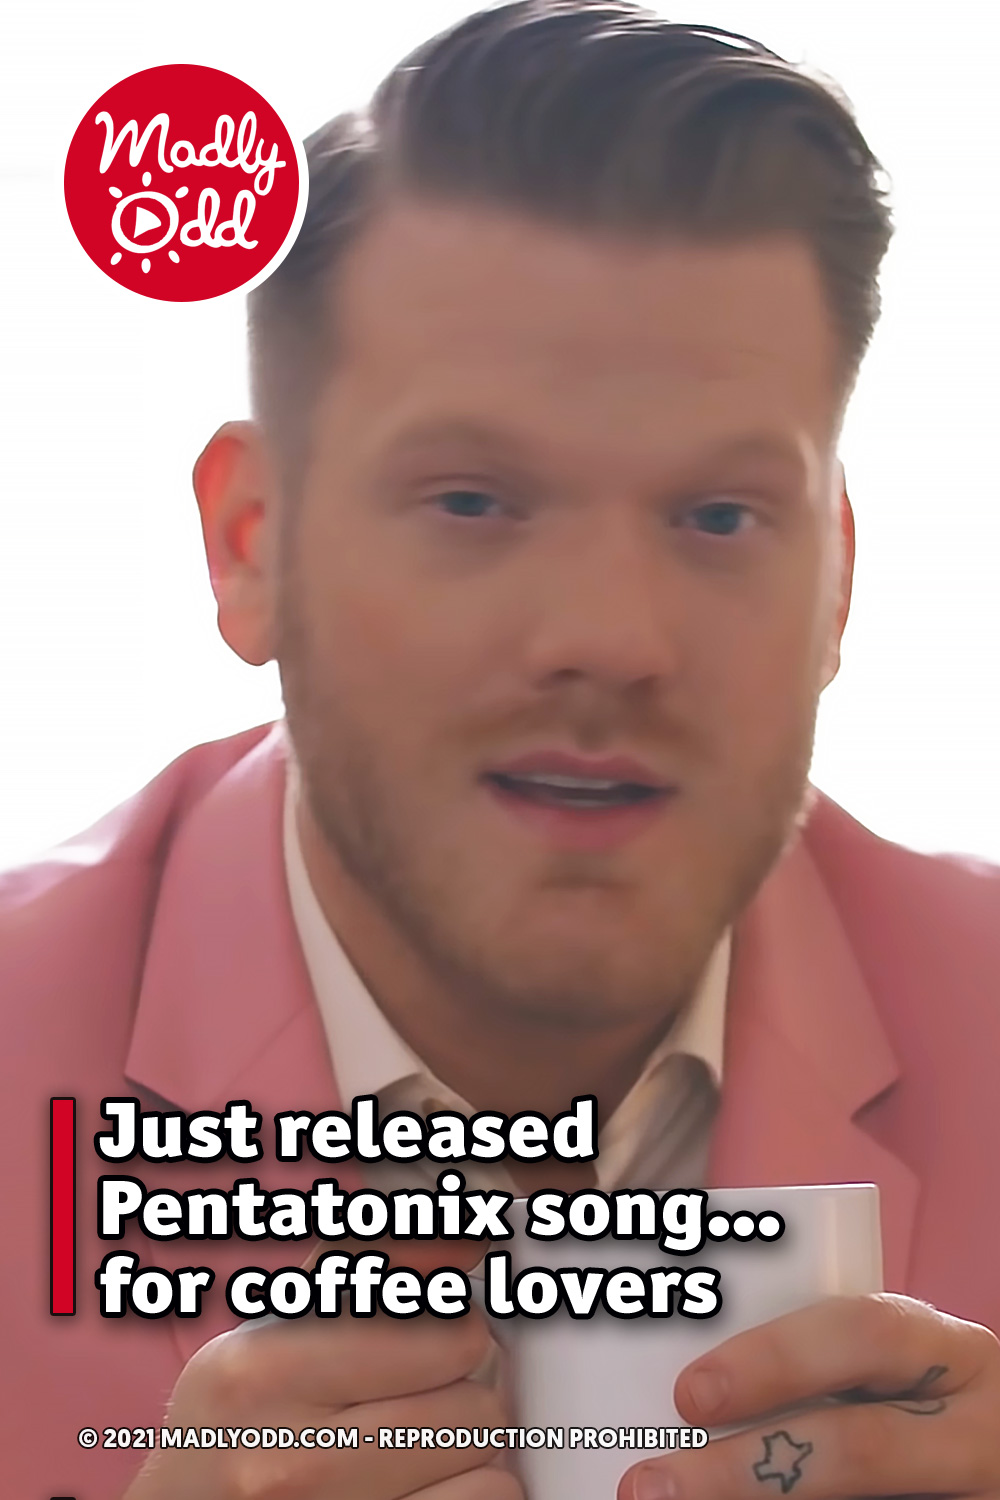 Just released Pentatonix song… for coffee lovers